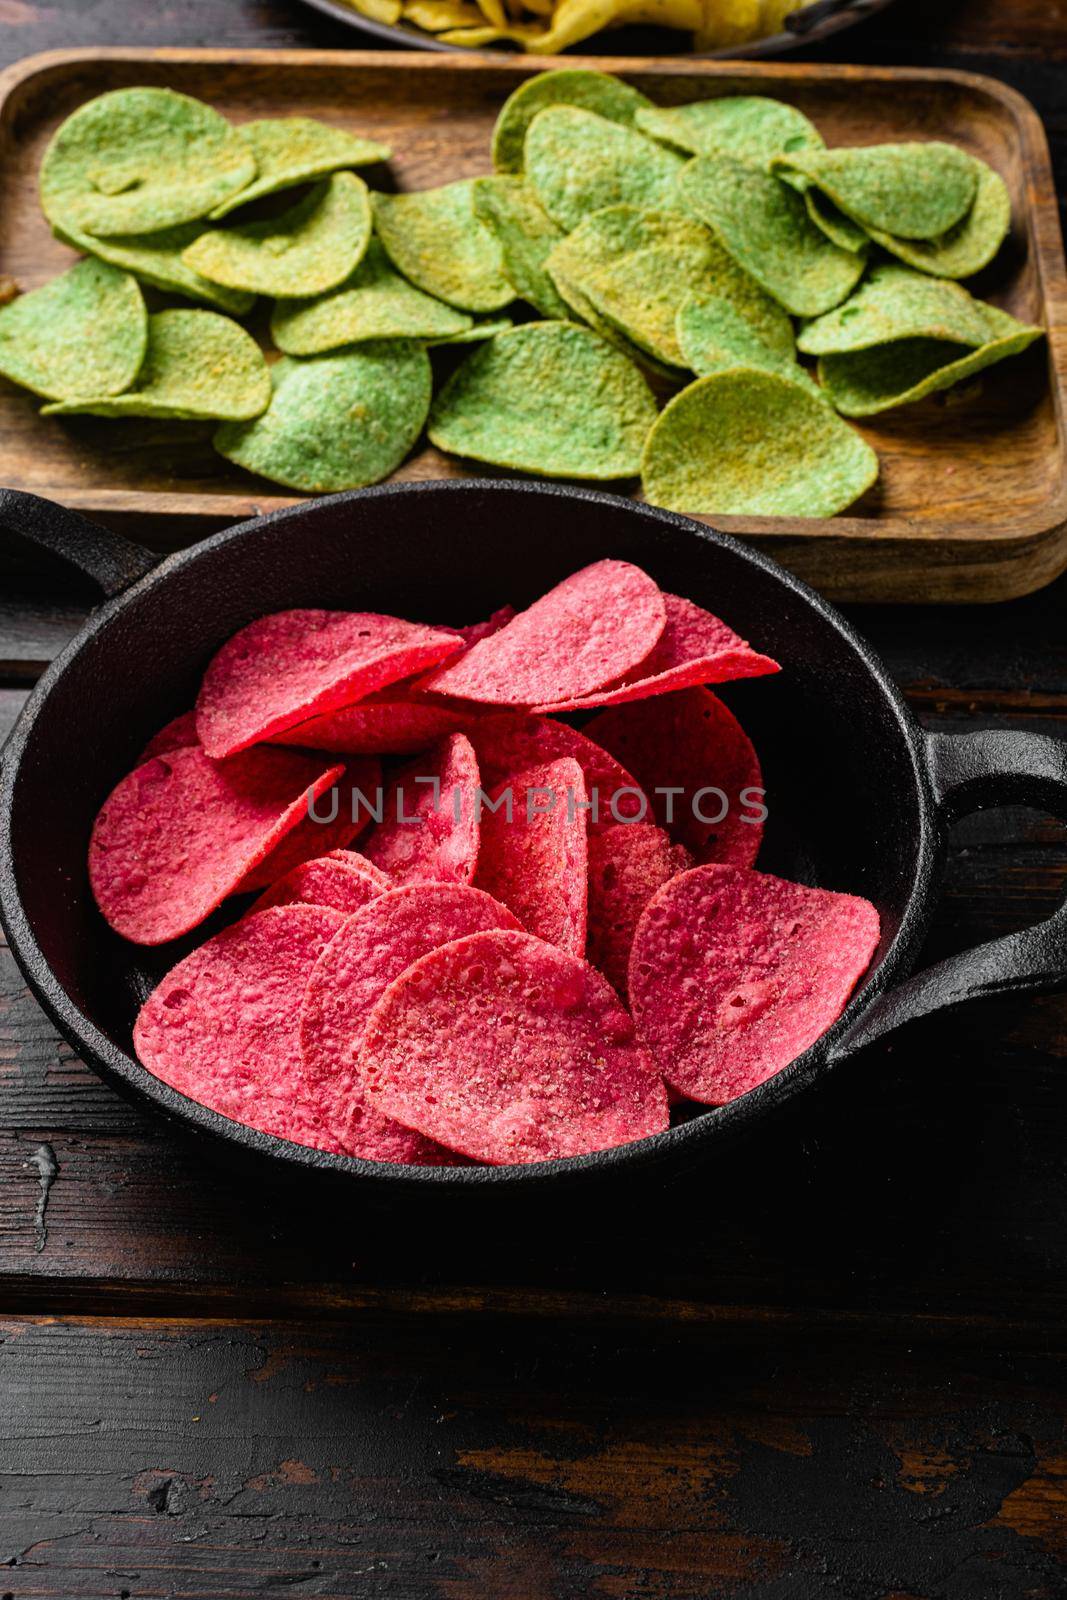 Potato chips pink colored on old dark wooden table background by Ilianesolenyi